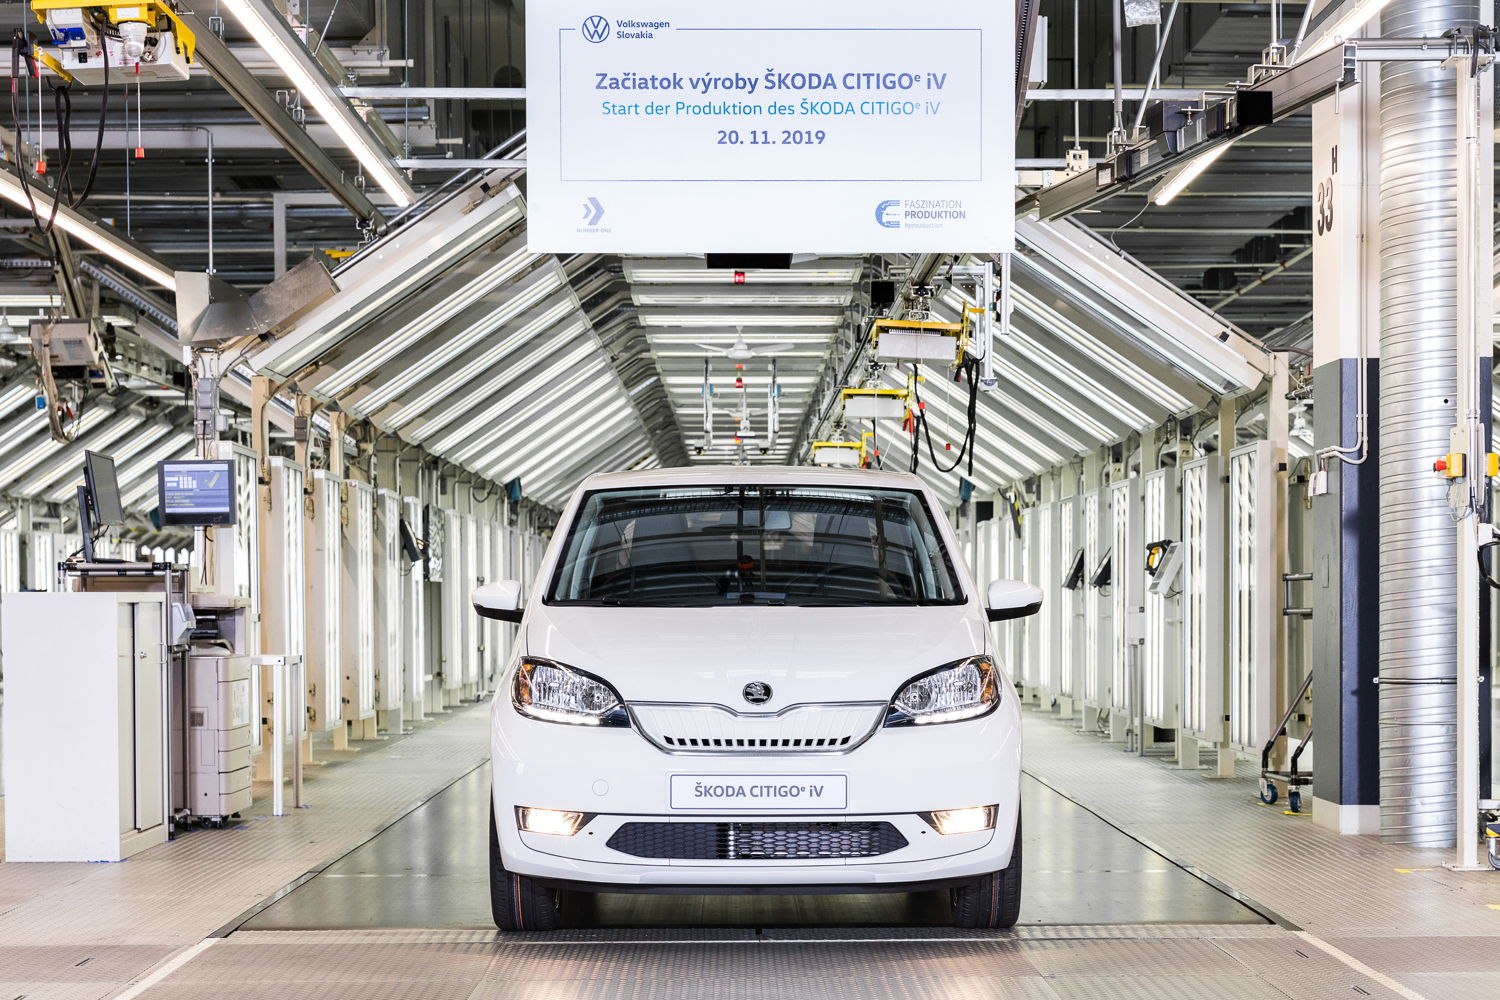 The Czech manufacturer has taken the next step on the path
to electrifying its model range: on 20 November, the first
CITIGOe iV, the brand’s first all-electric model, rolled off the
production line at the plant in Bratislava, Slovakia.